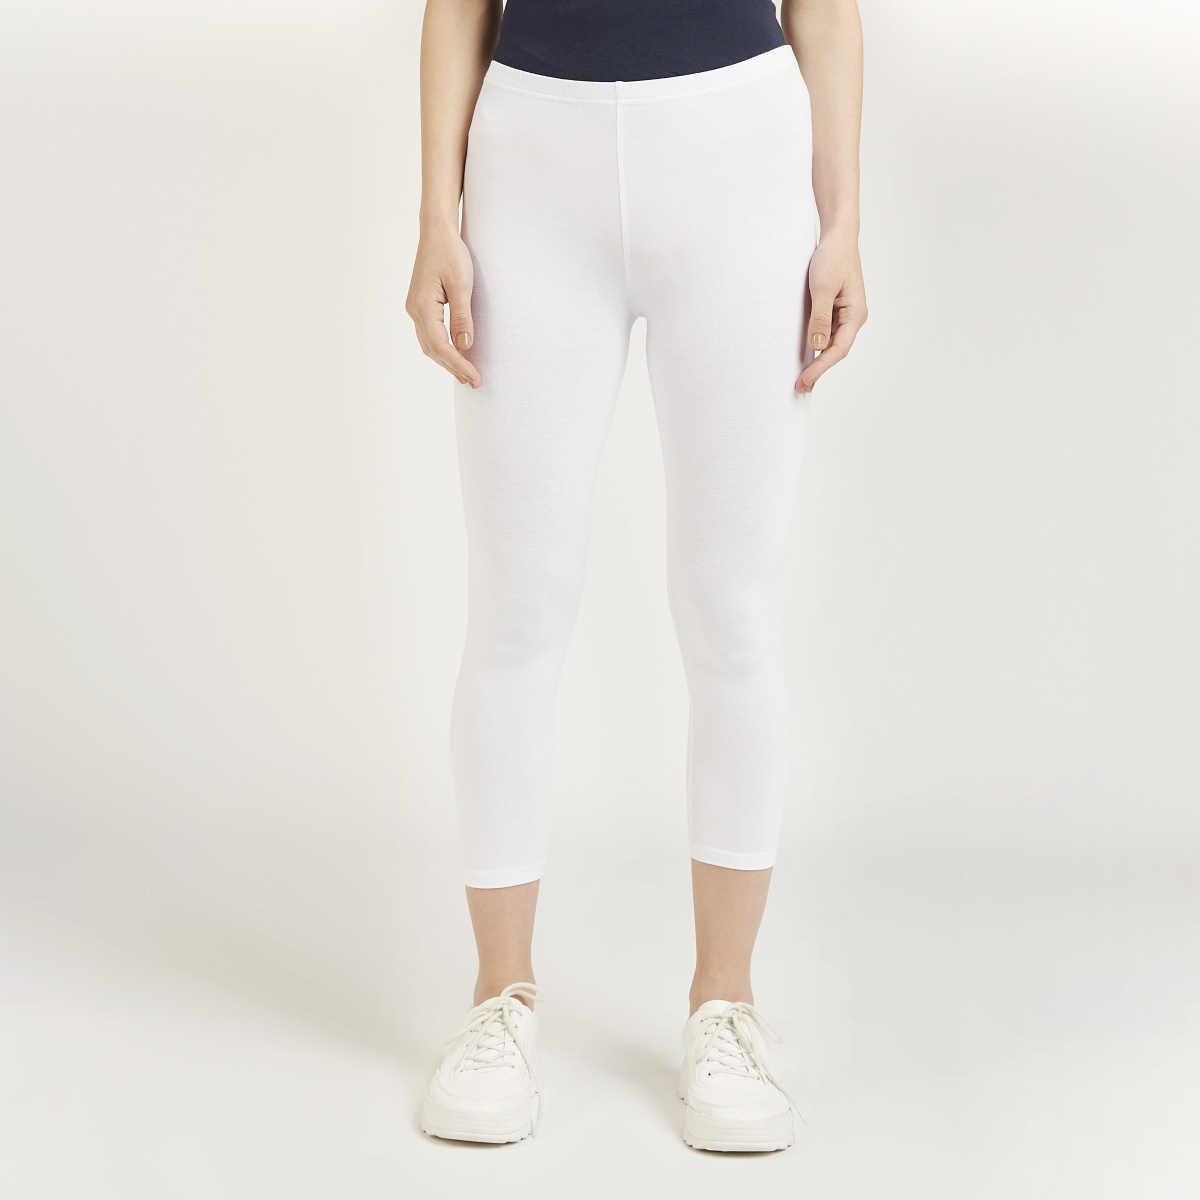 Solid Slim Fit Leggings with Elasticised Waistband